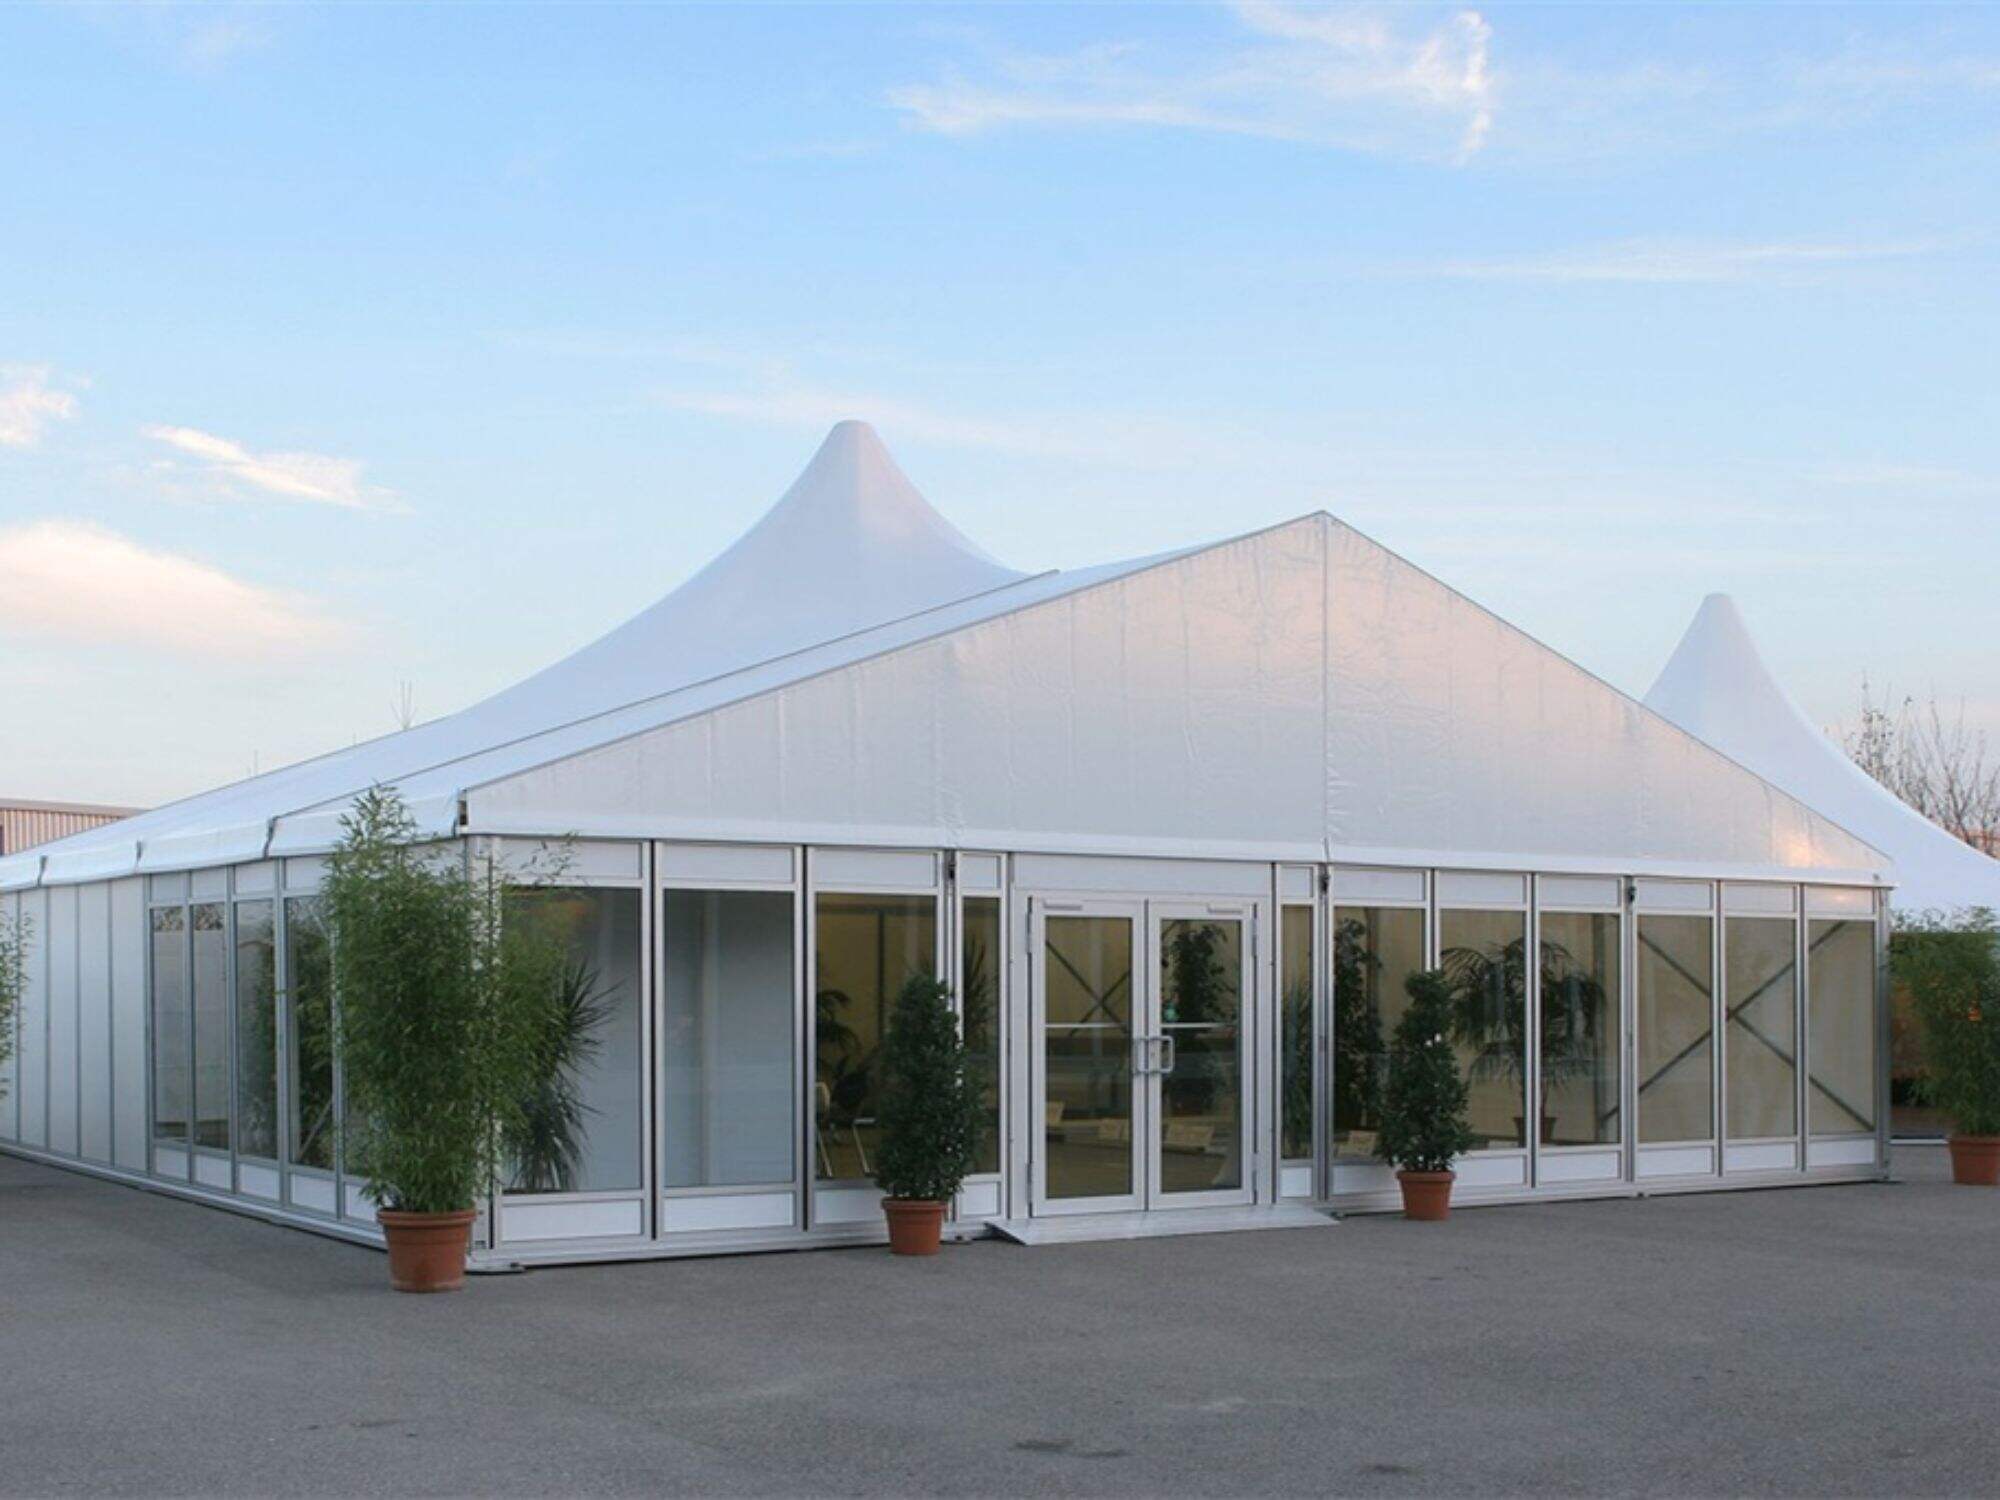 Mixed Tent for Ceremonies, Tent for Celebrations